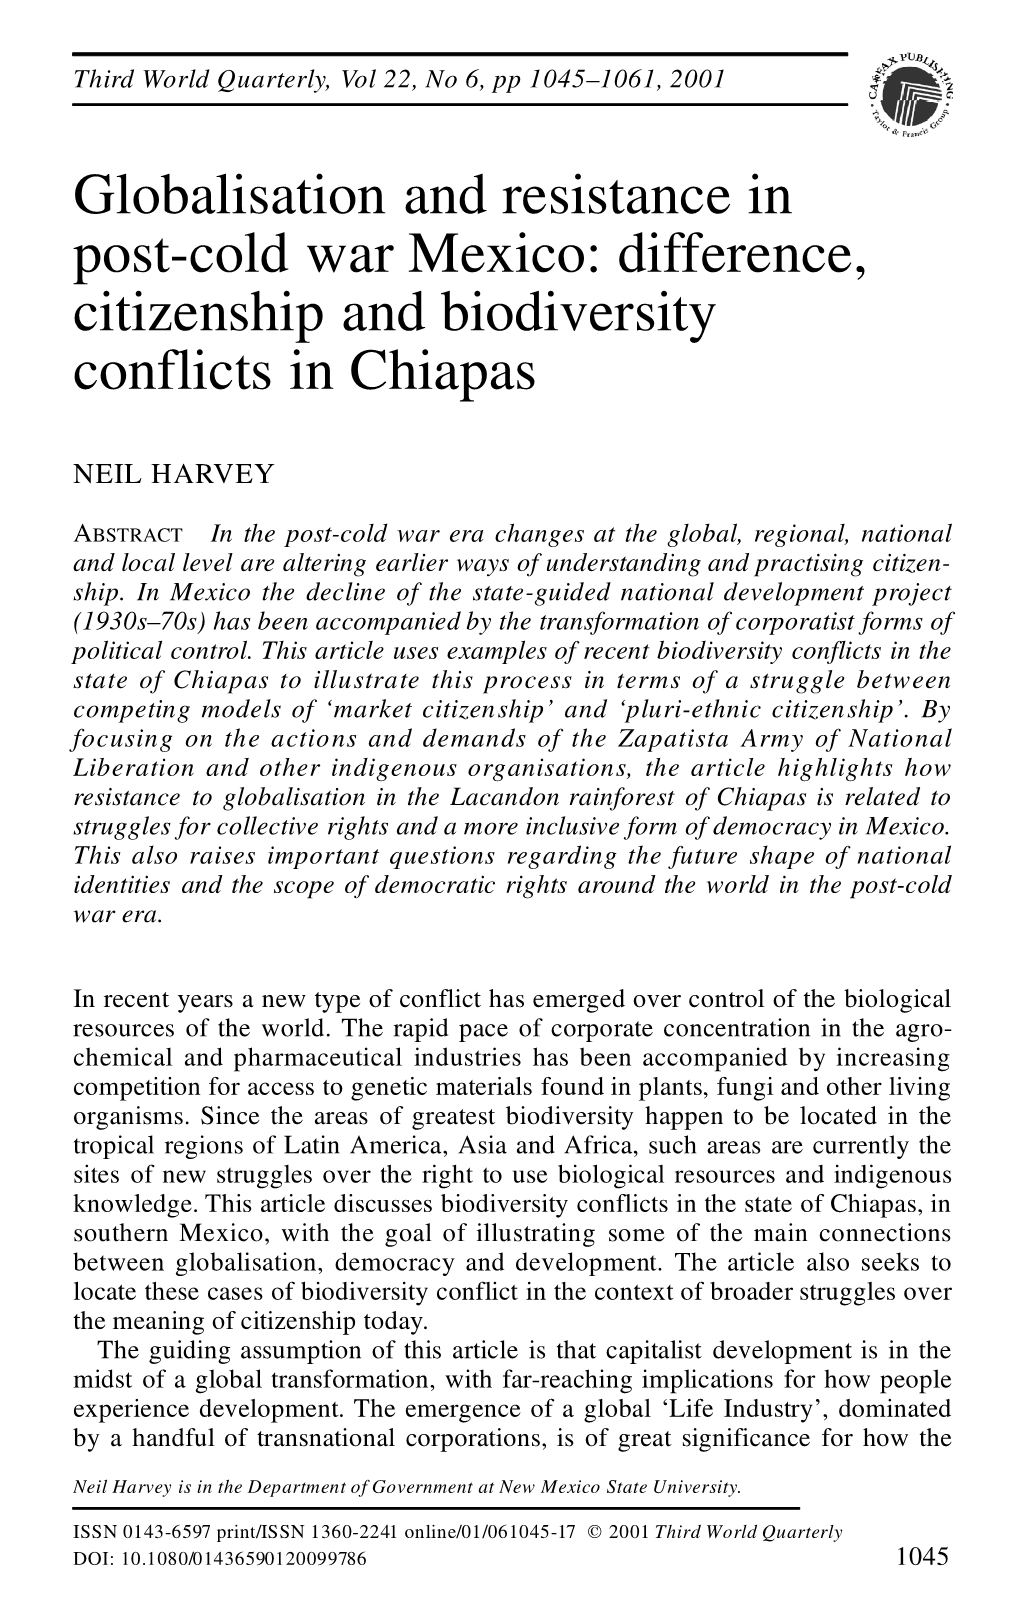 Globalisation and Resistance in Post-Cold War Mexico: Difference, Citizenship and Biodiversity Conflicts in Chiapas